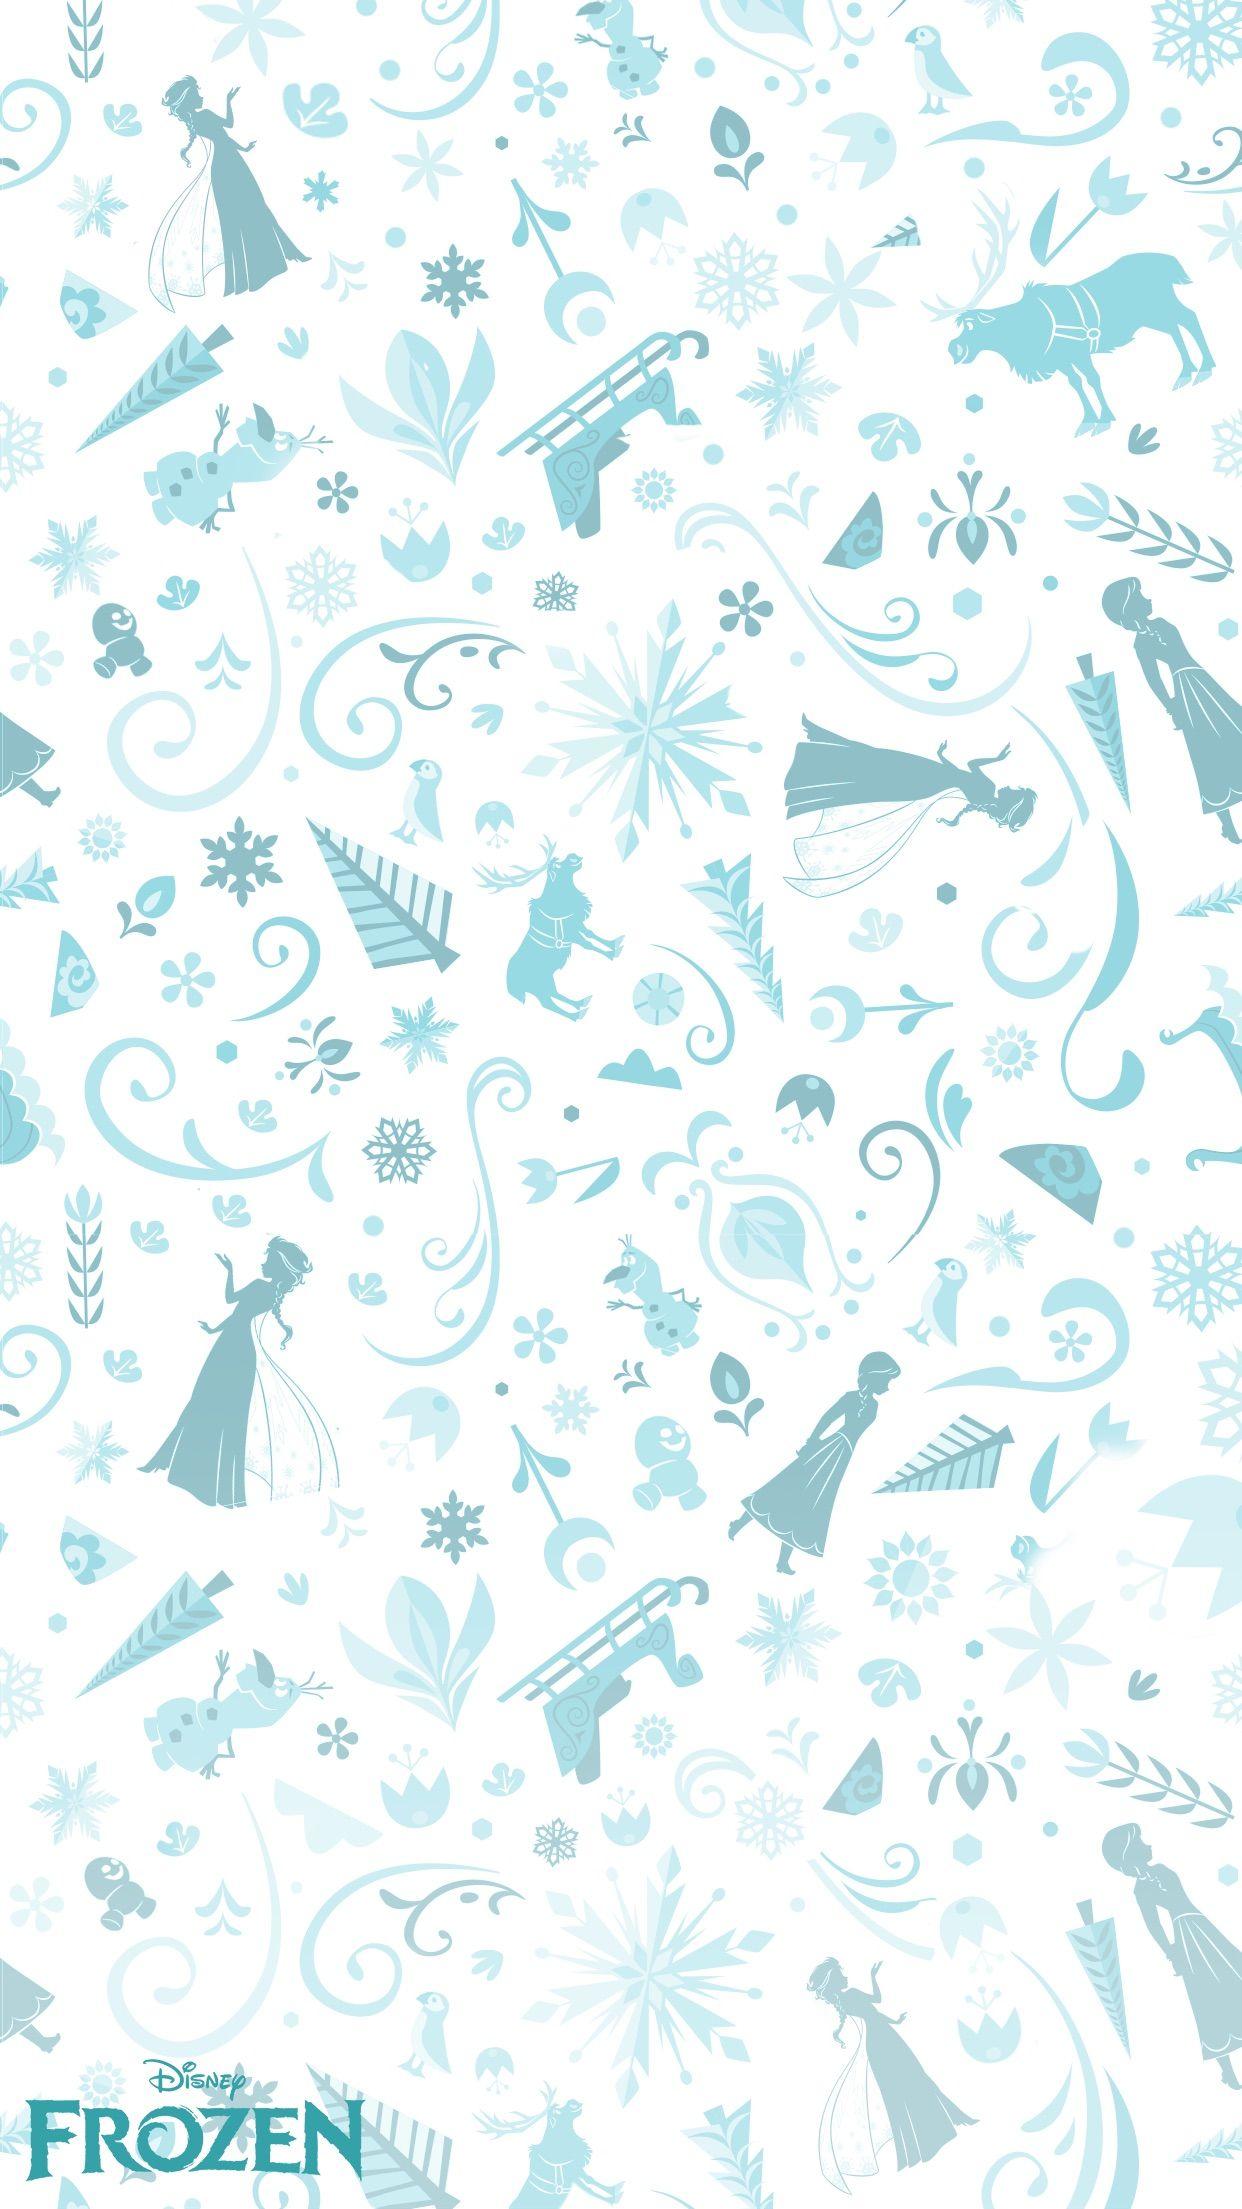 These Frozen Wallpaper Will Definitely Make Your Phone Even